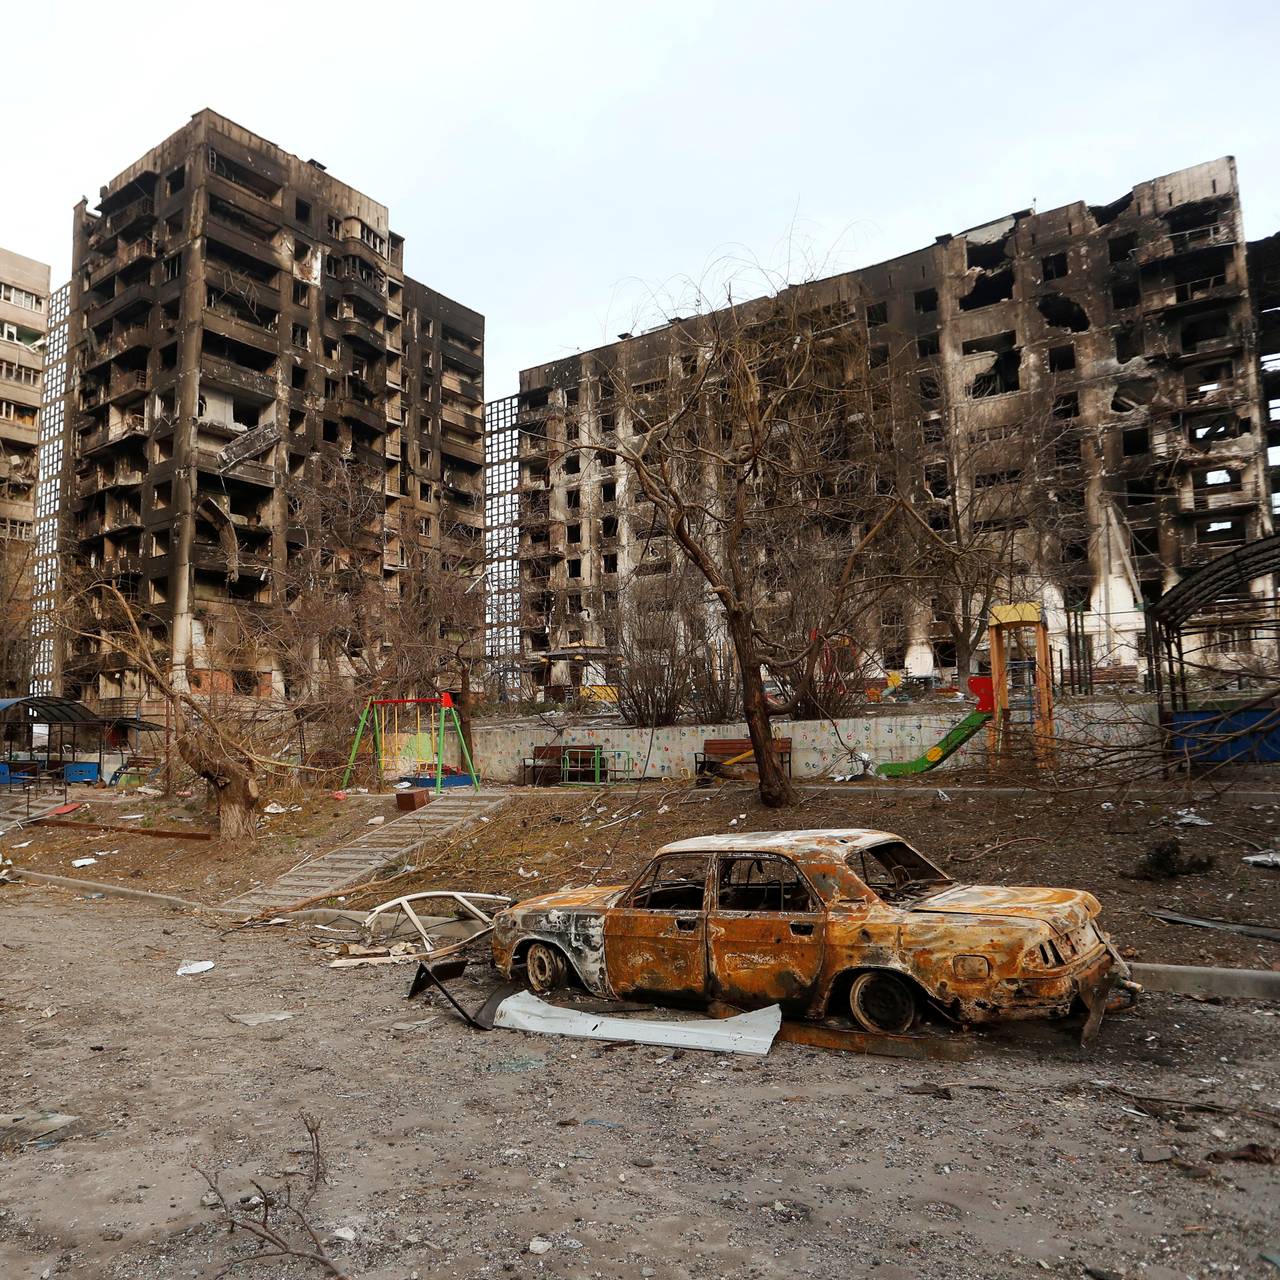 The photo shows an apartment complex in Mariupol that was completely damaged after the Russian attacks.